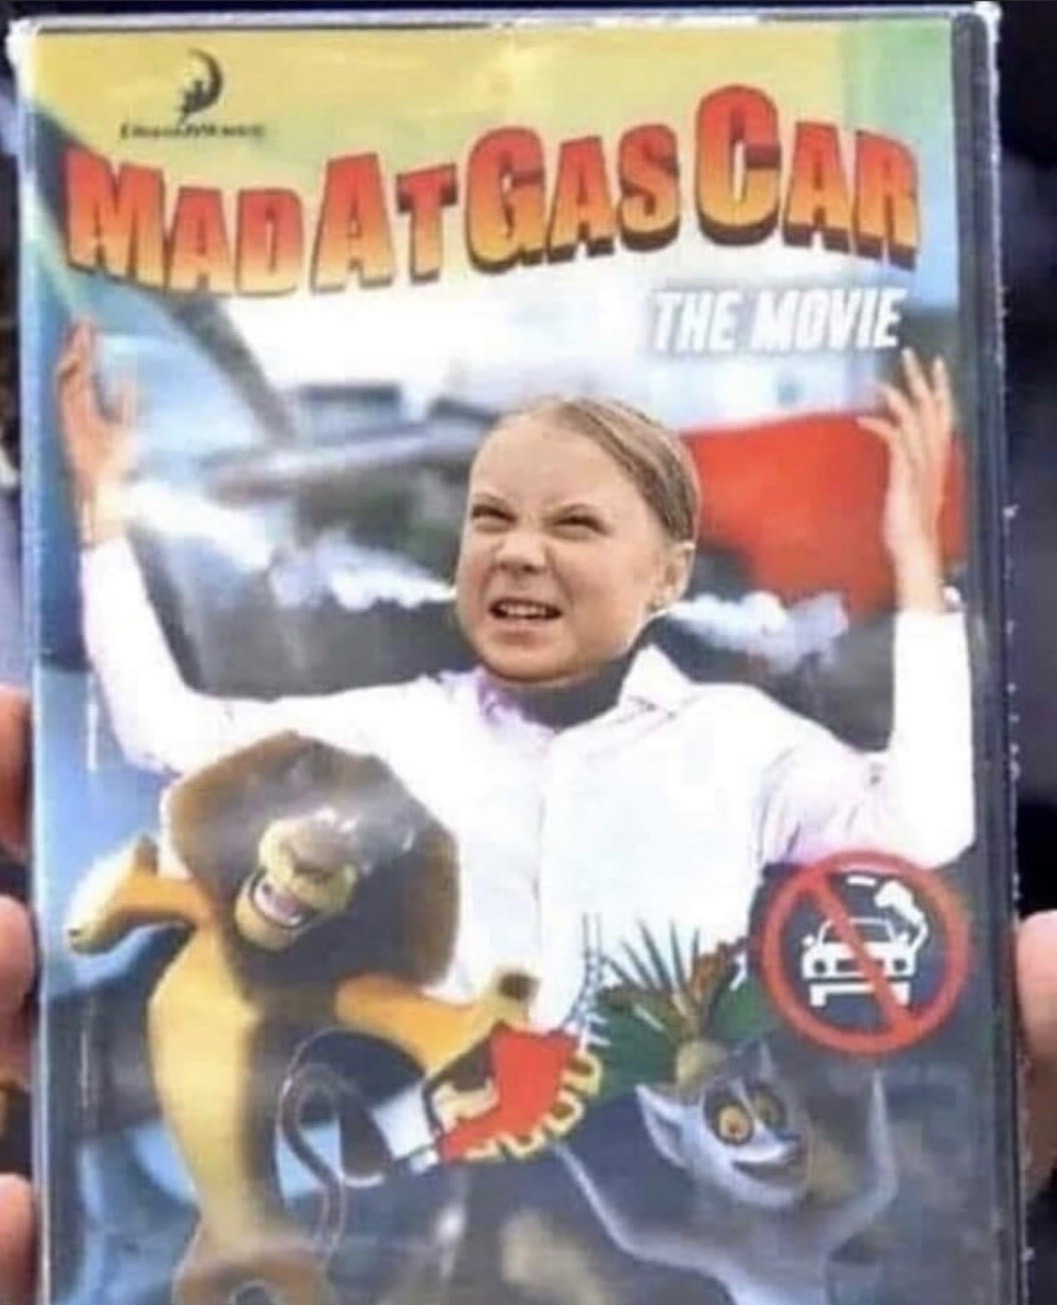 mad at gas car - Wad Atrascan The Movie